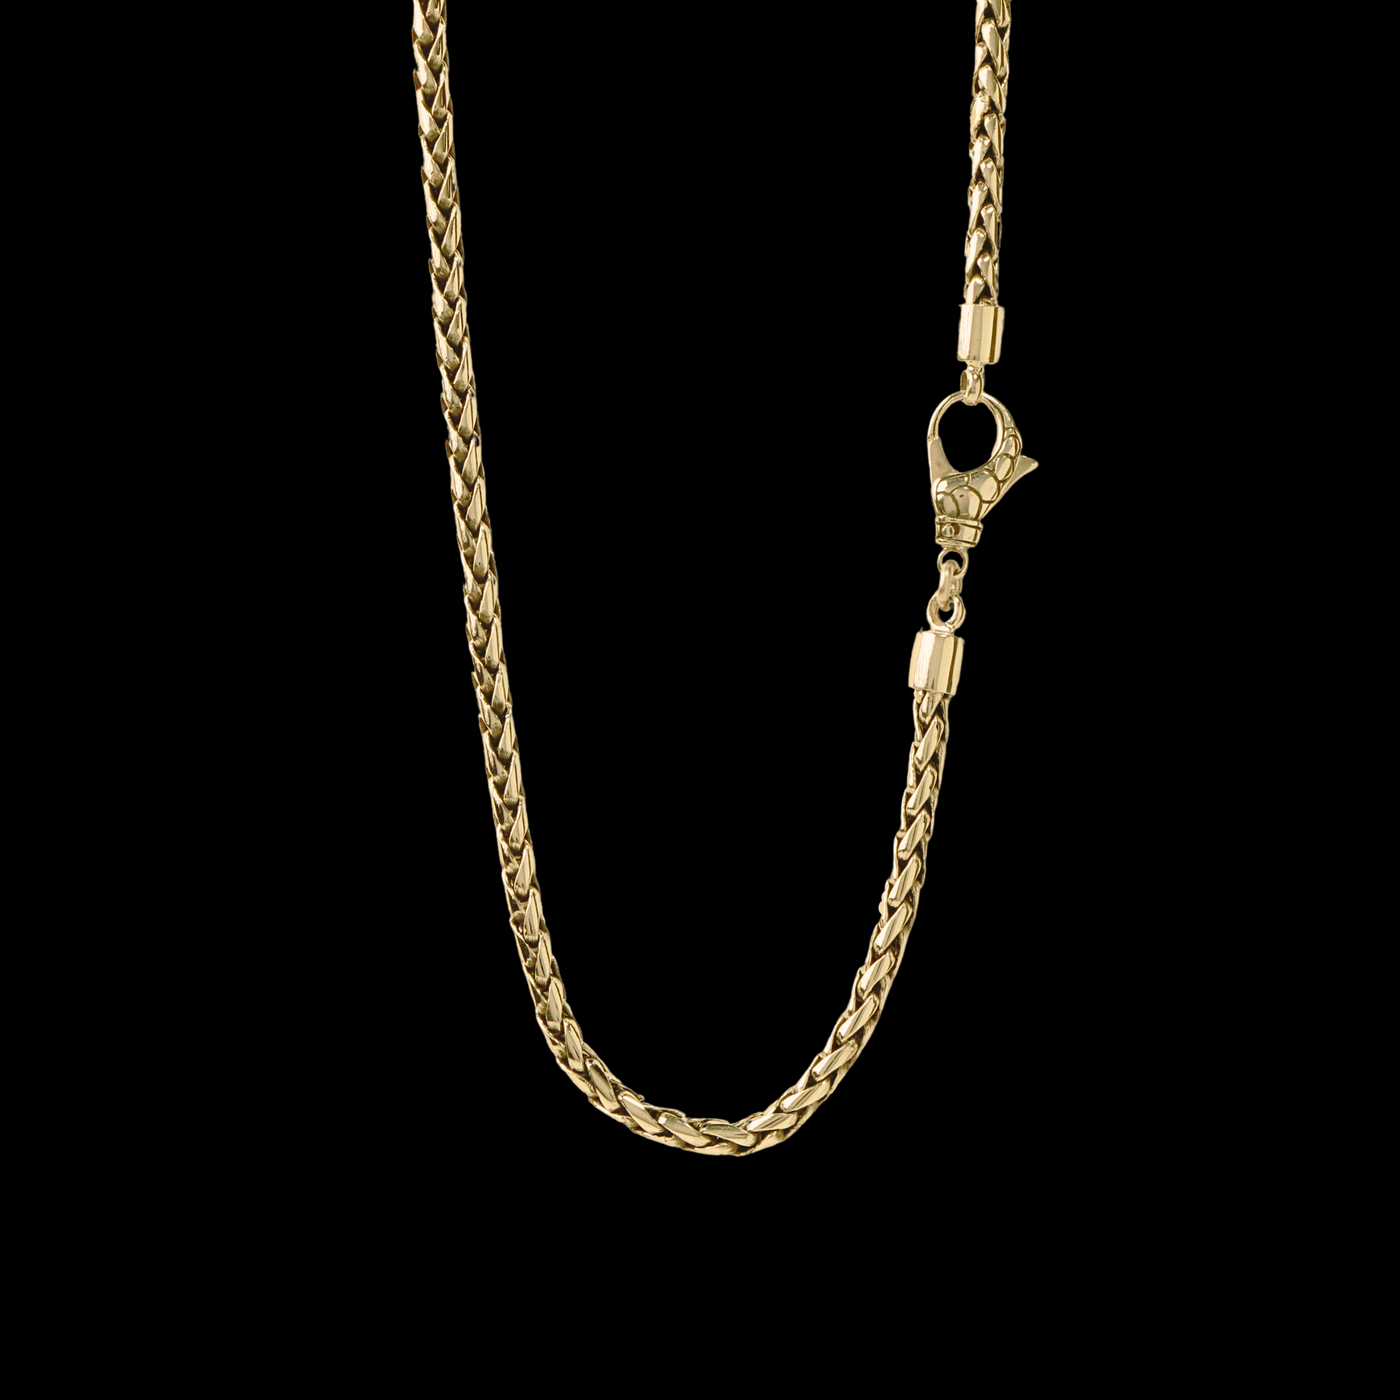 Bali 18k Yellow Gold necklace (4 mm)